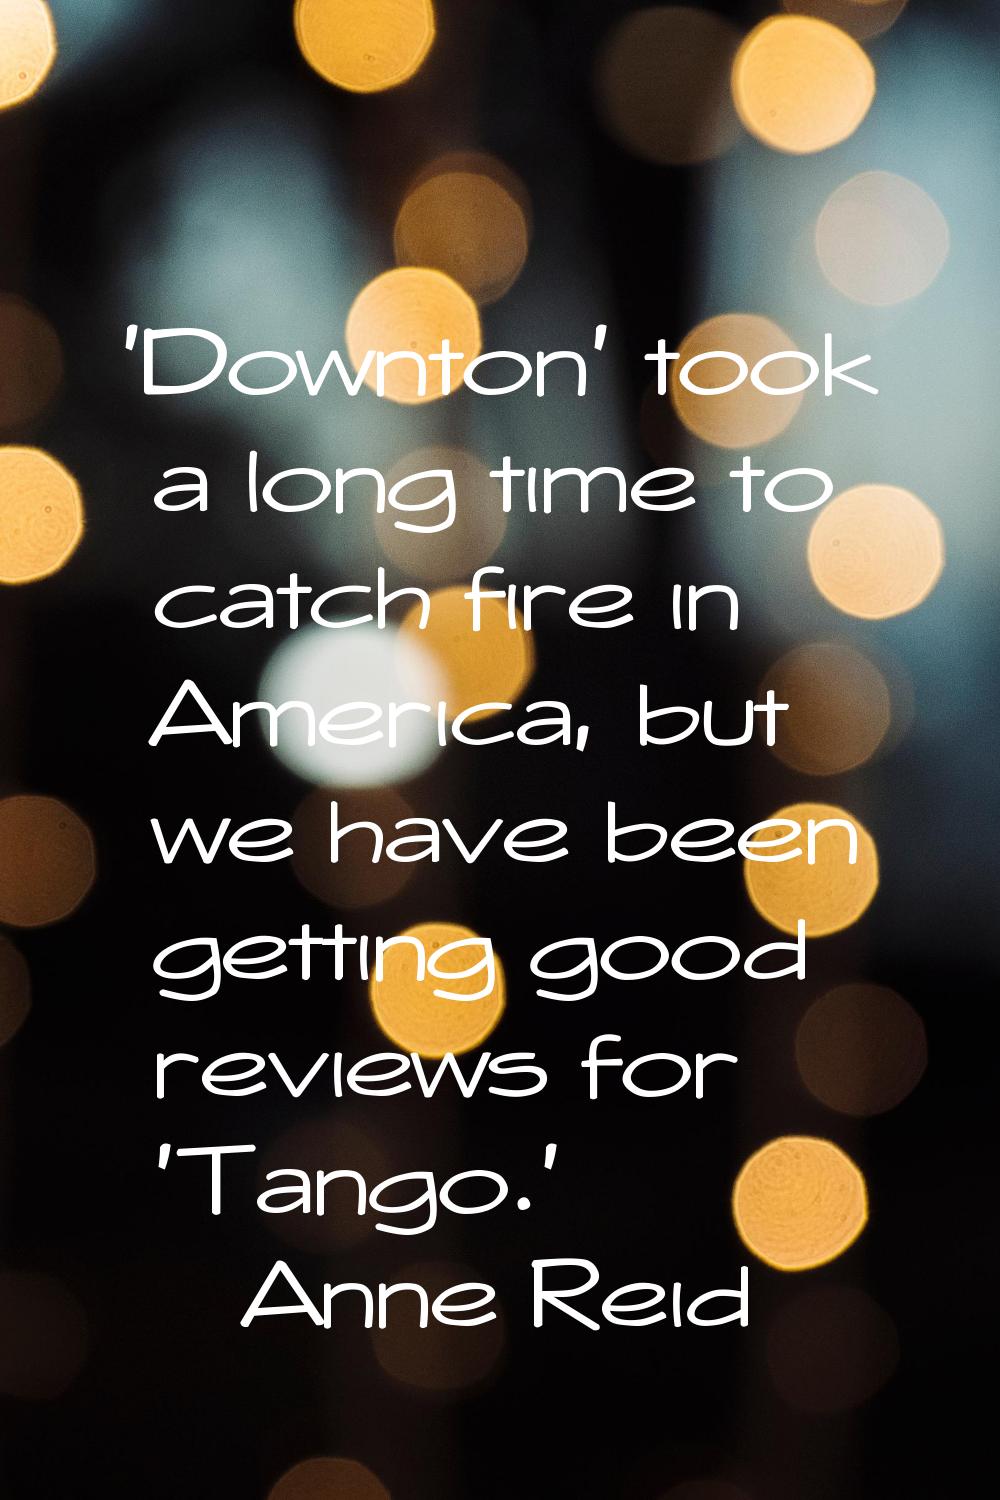 'Downton' took a long time to catch fire in America, but we have been getting good reviews for 'Tan